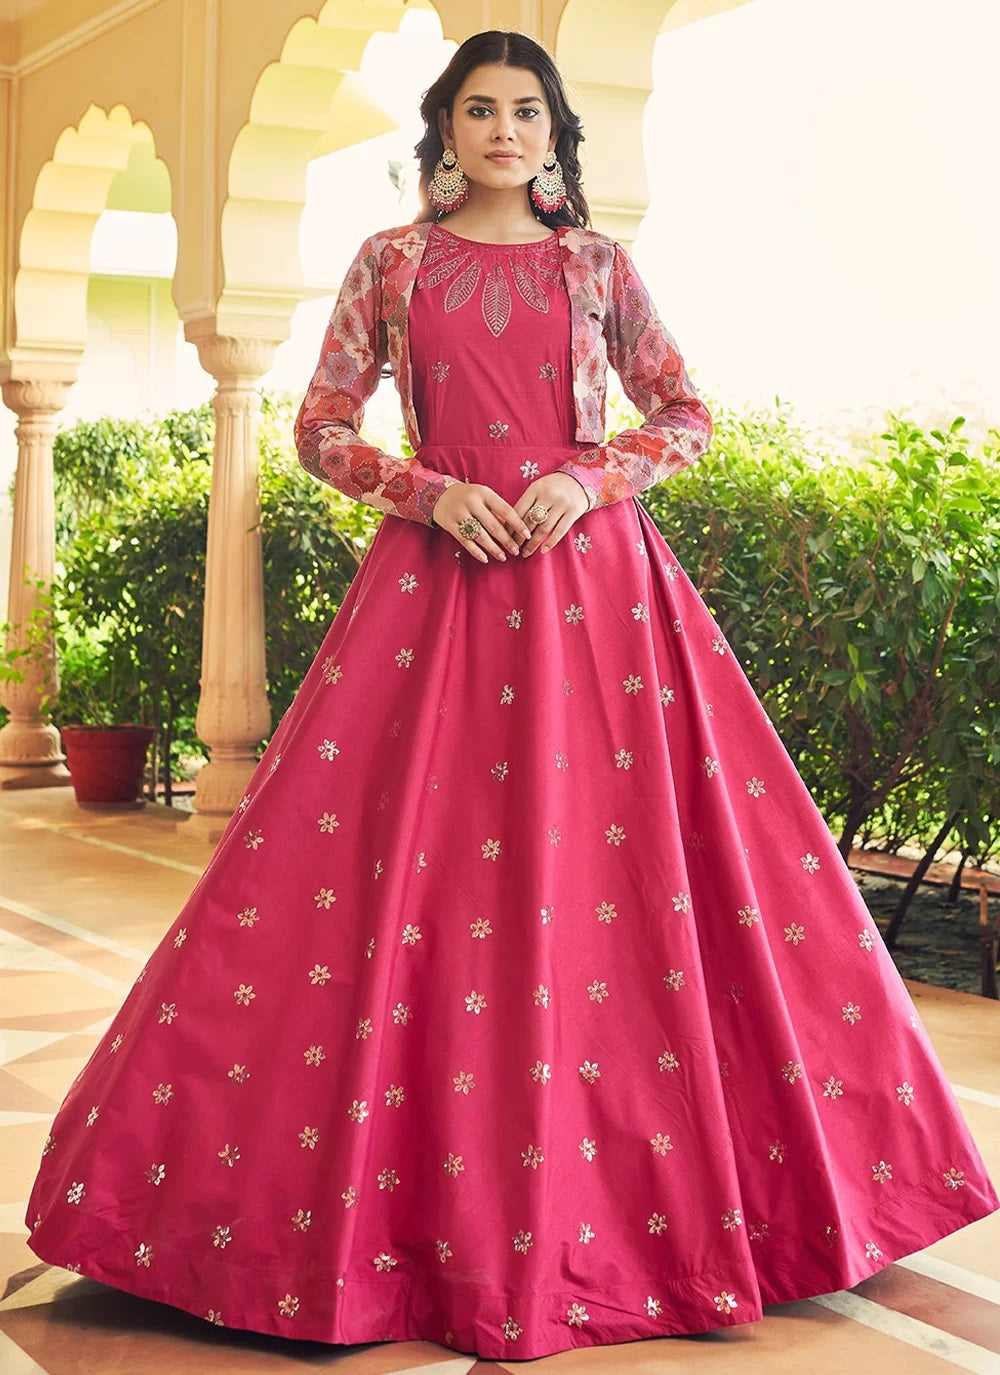 Exclusive Dress Designer Net Gown For Women Floral Bride Gown Indian  Wedding Reception Gown Pakistani Suit Floral Anarkali Gown at Rs 1799.00 |  Ladies Net Gowns | ID: 26440675048